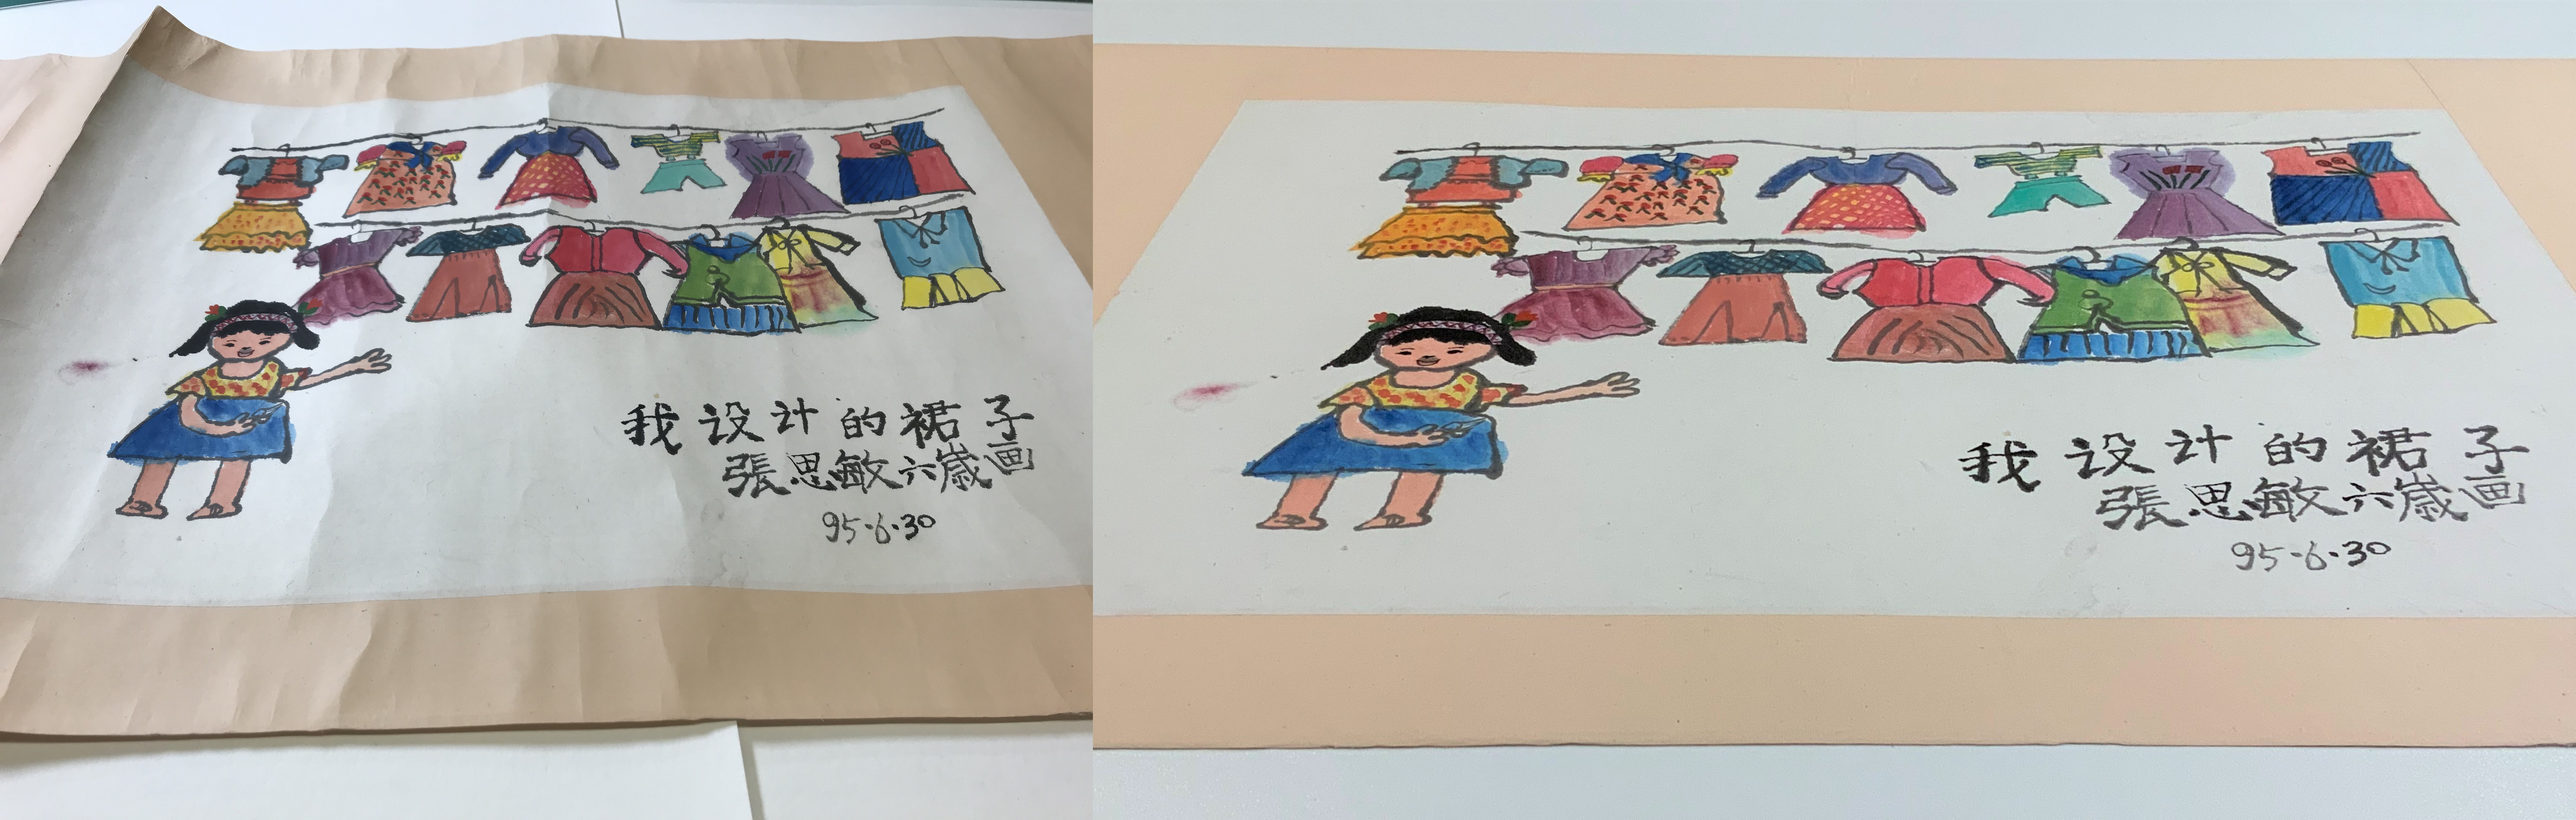 ‘My Dress Design’ by Simin Zhang before and after conservation treatment 